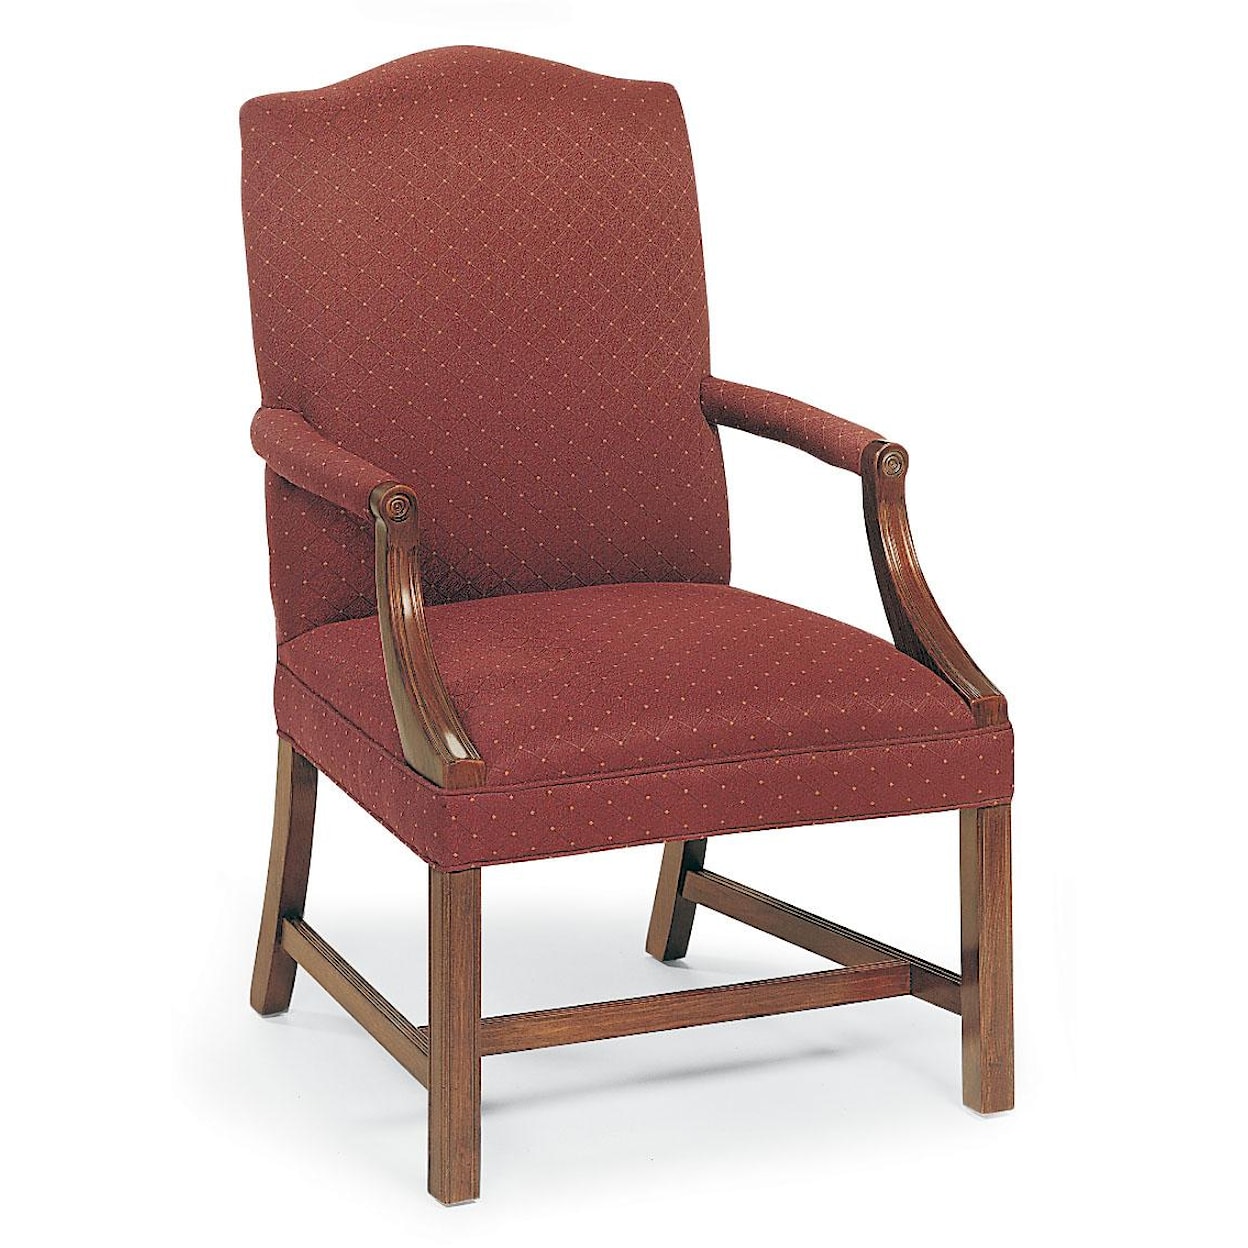 Fairfield Chairs Exposed Wood Chair